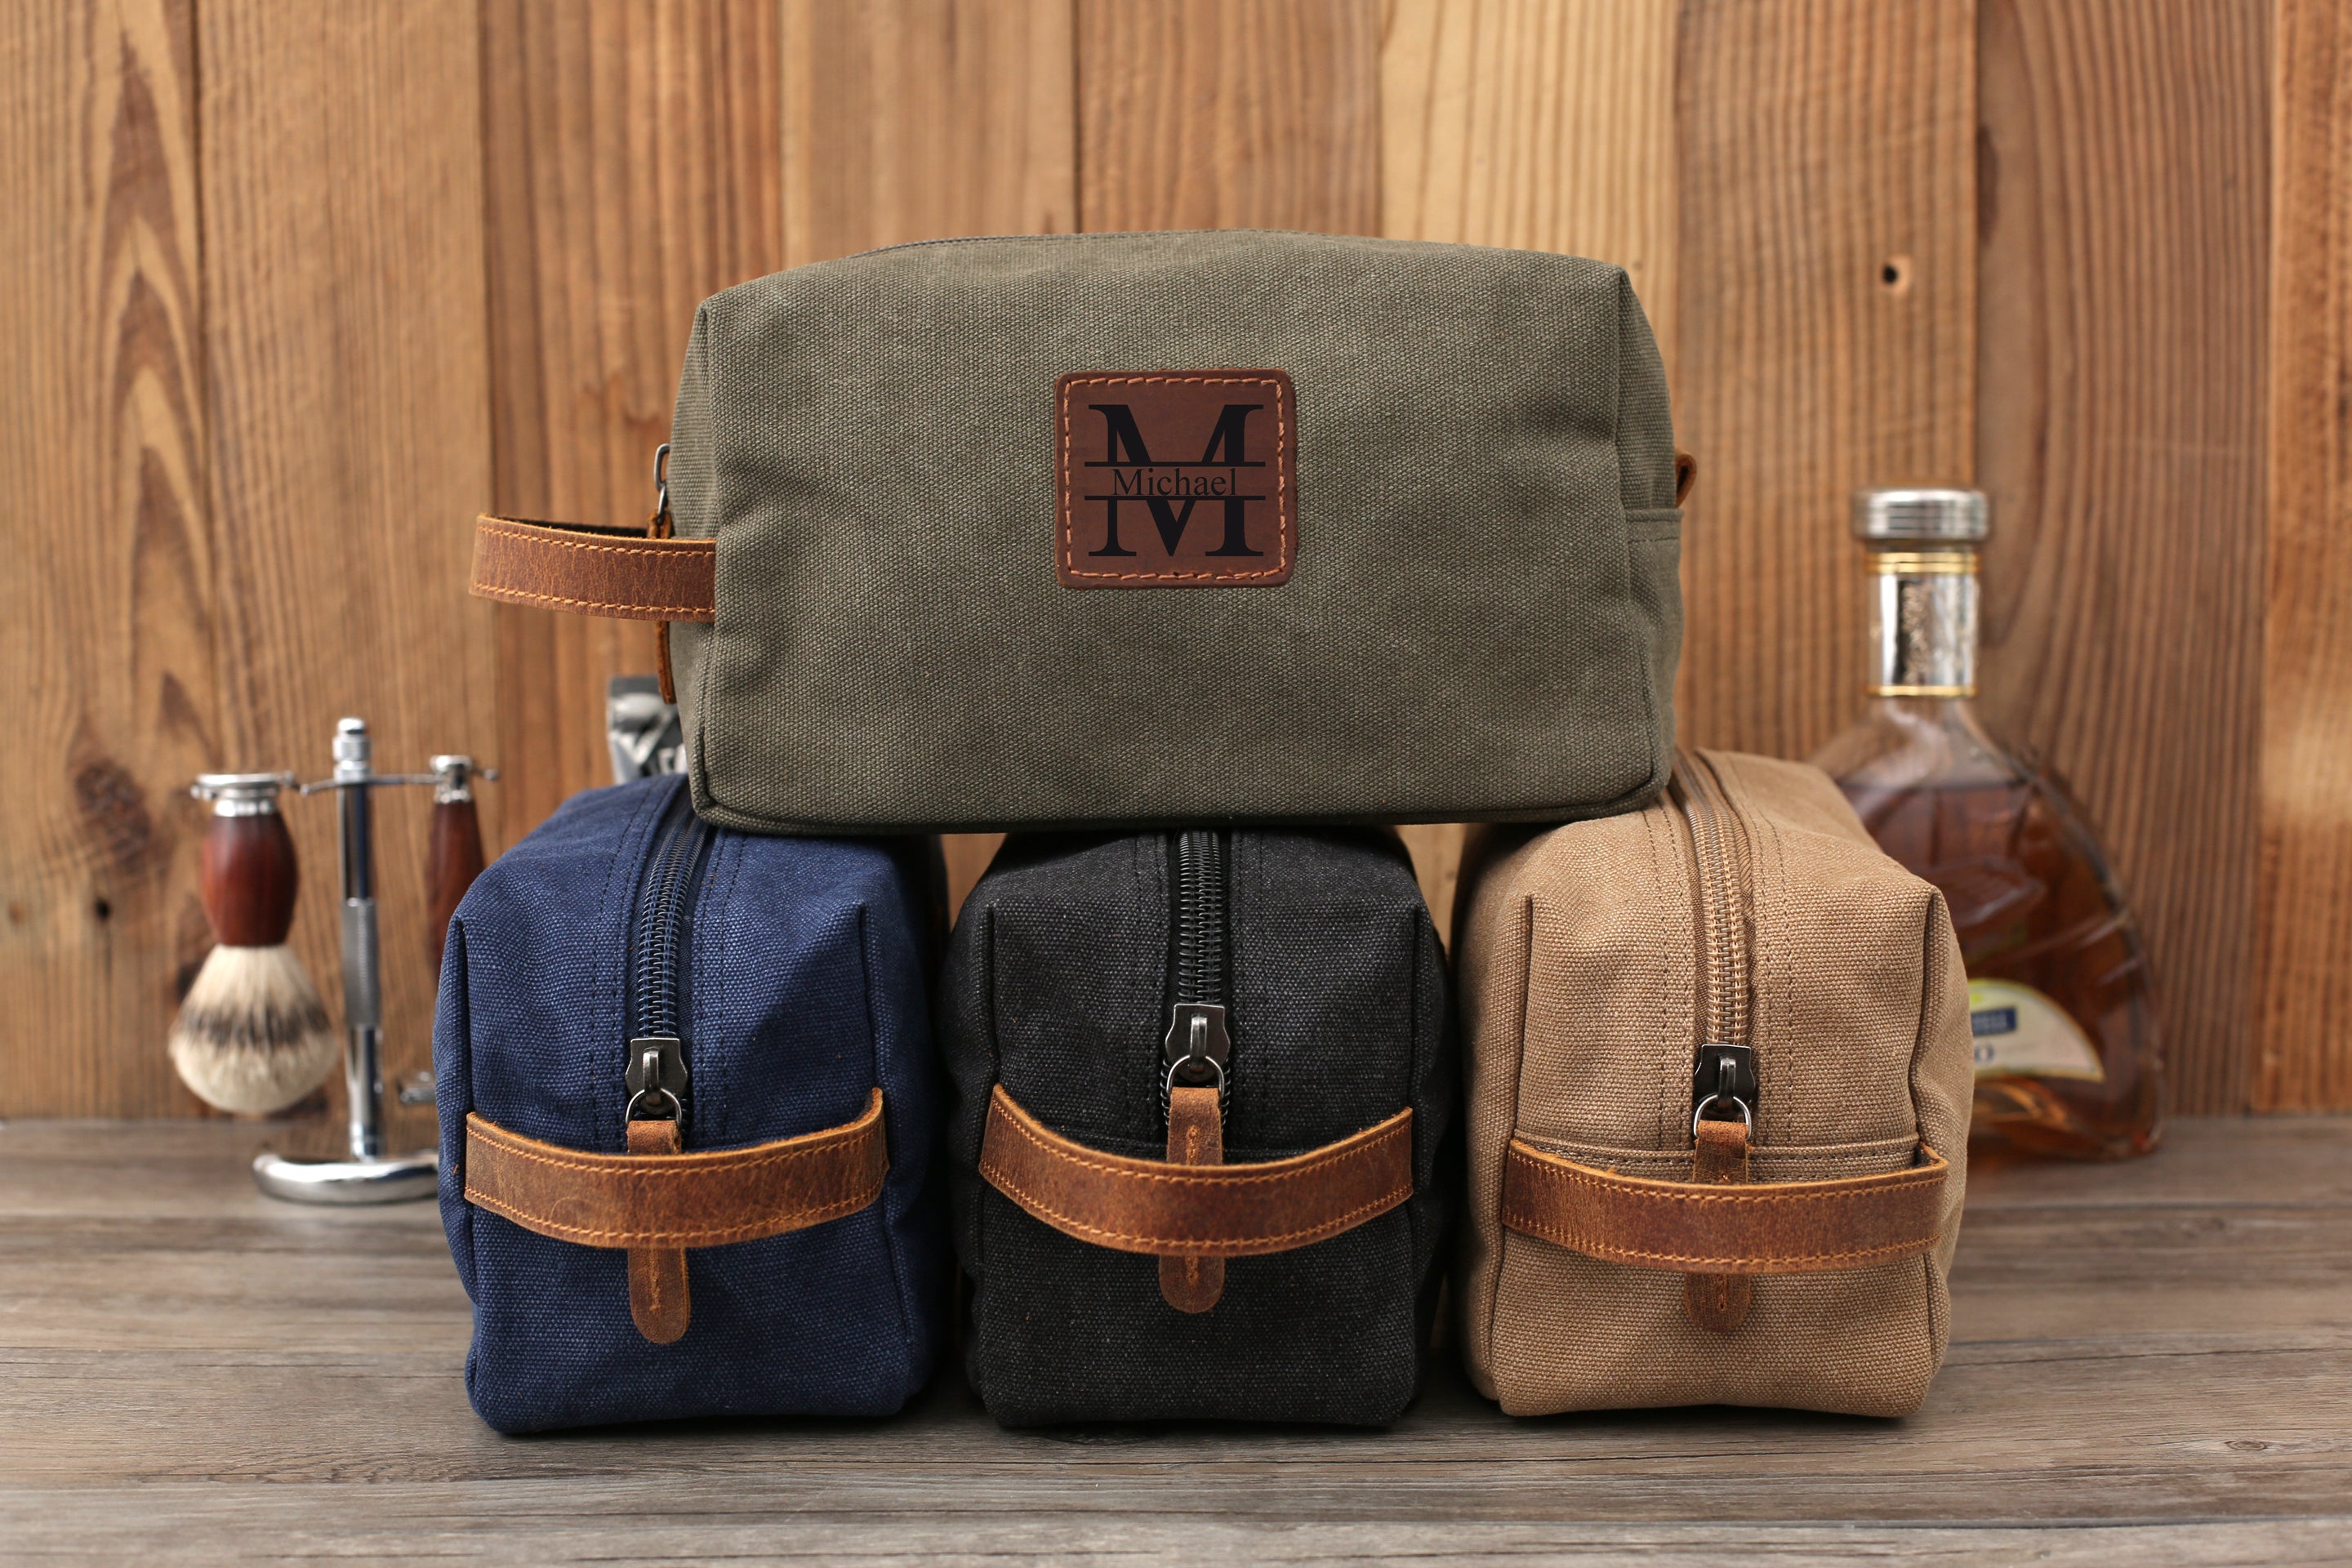 Personalized Men's Travel Toiletry Bag - Classic Canvas